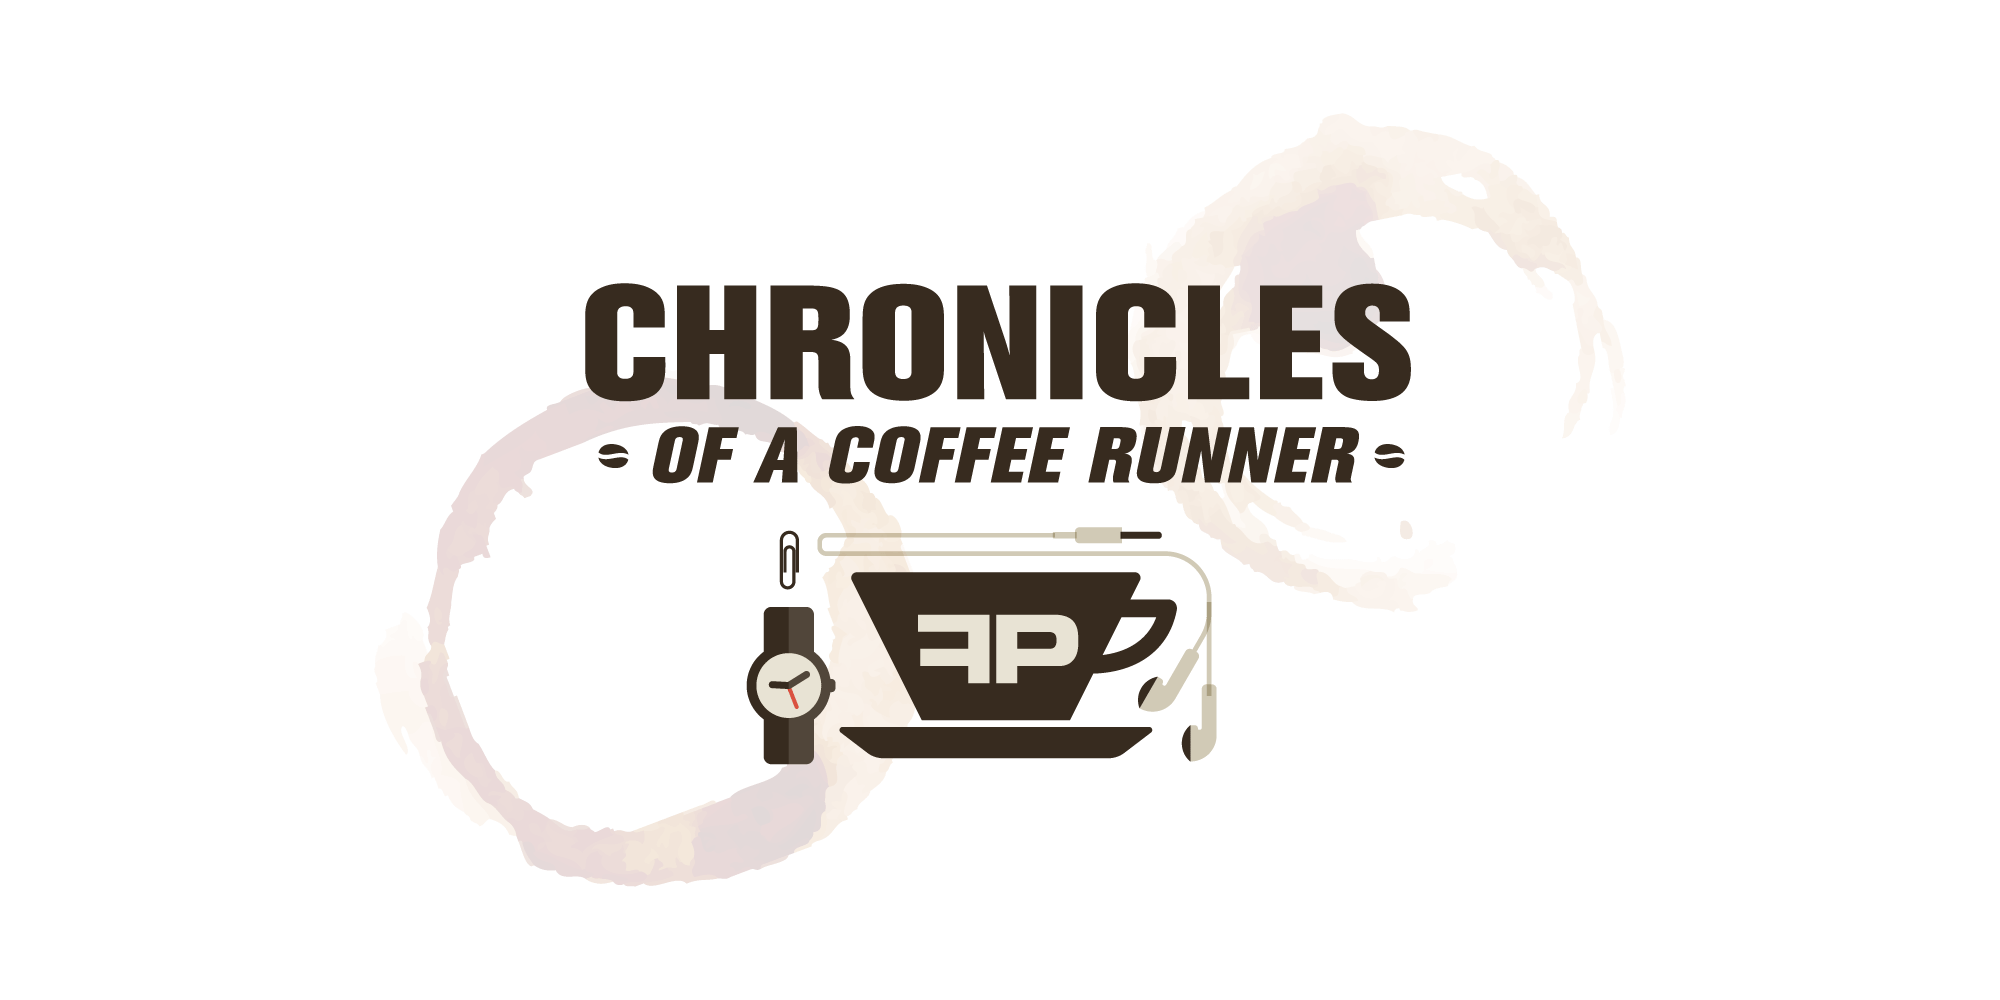 coffeerunner blog header - The Chronicles of A Coffee Runner Part Three: